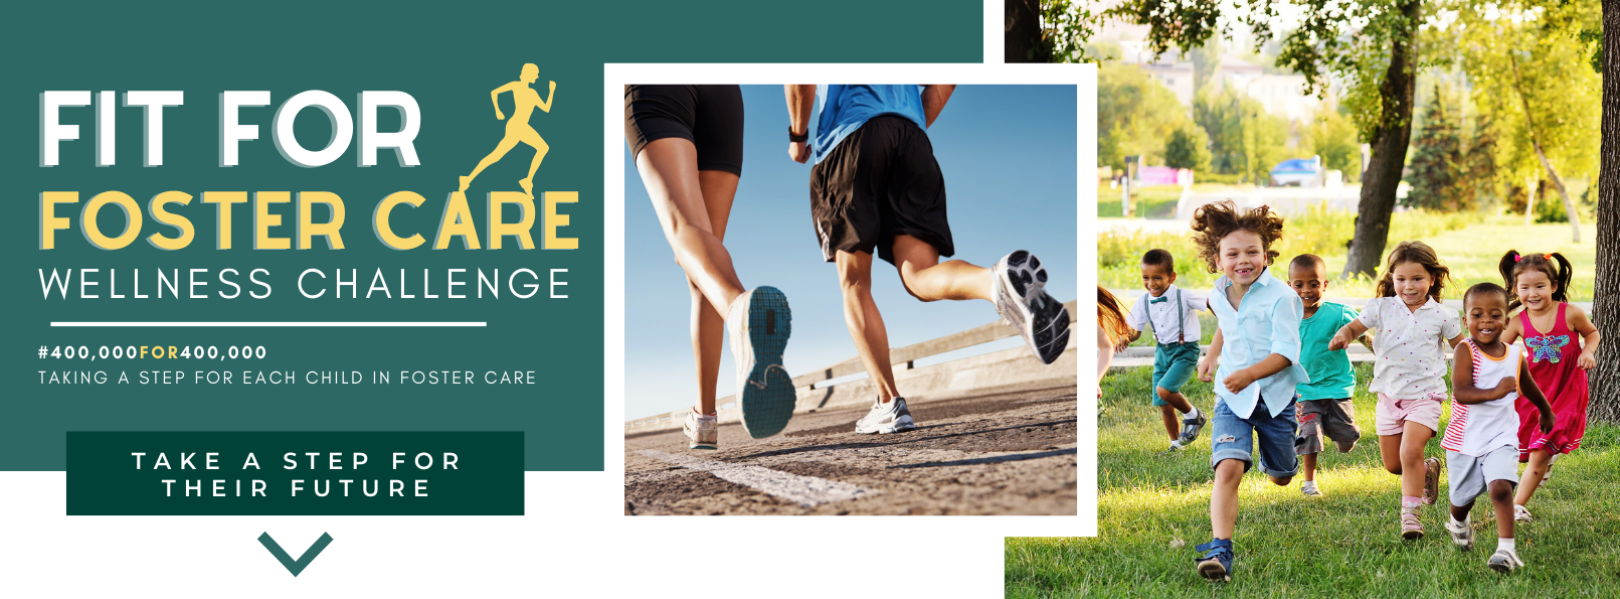 Fit for Foster Care Wellness Challenge